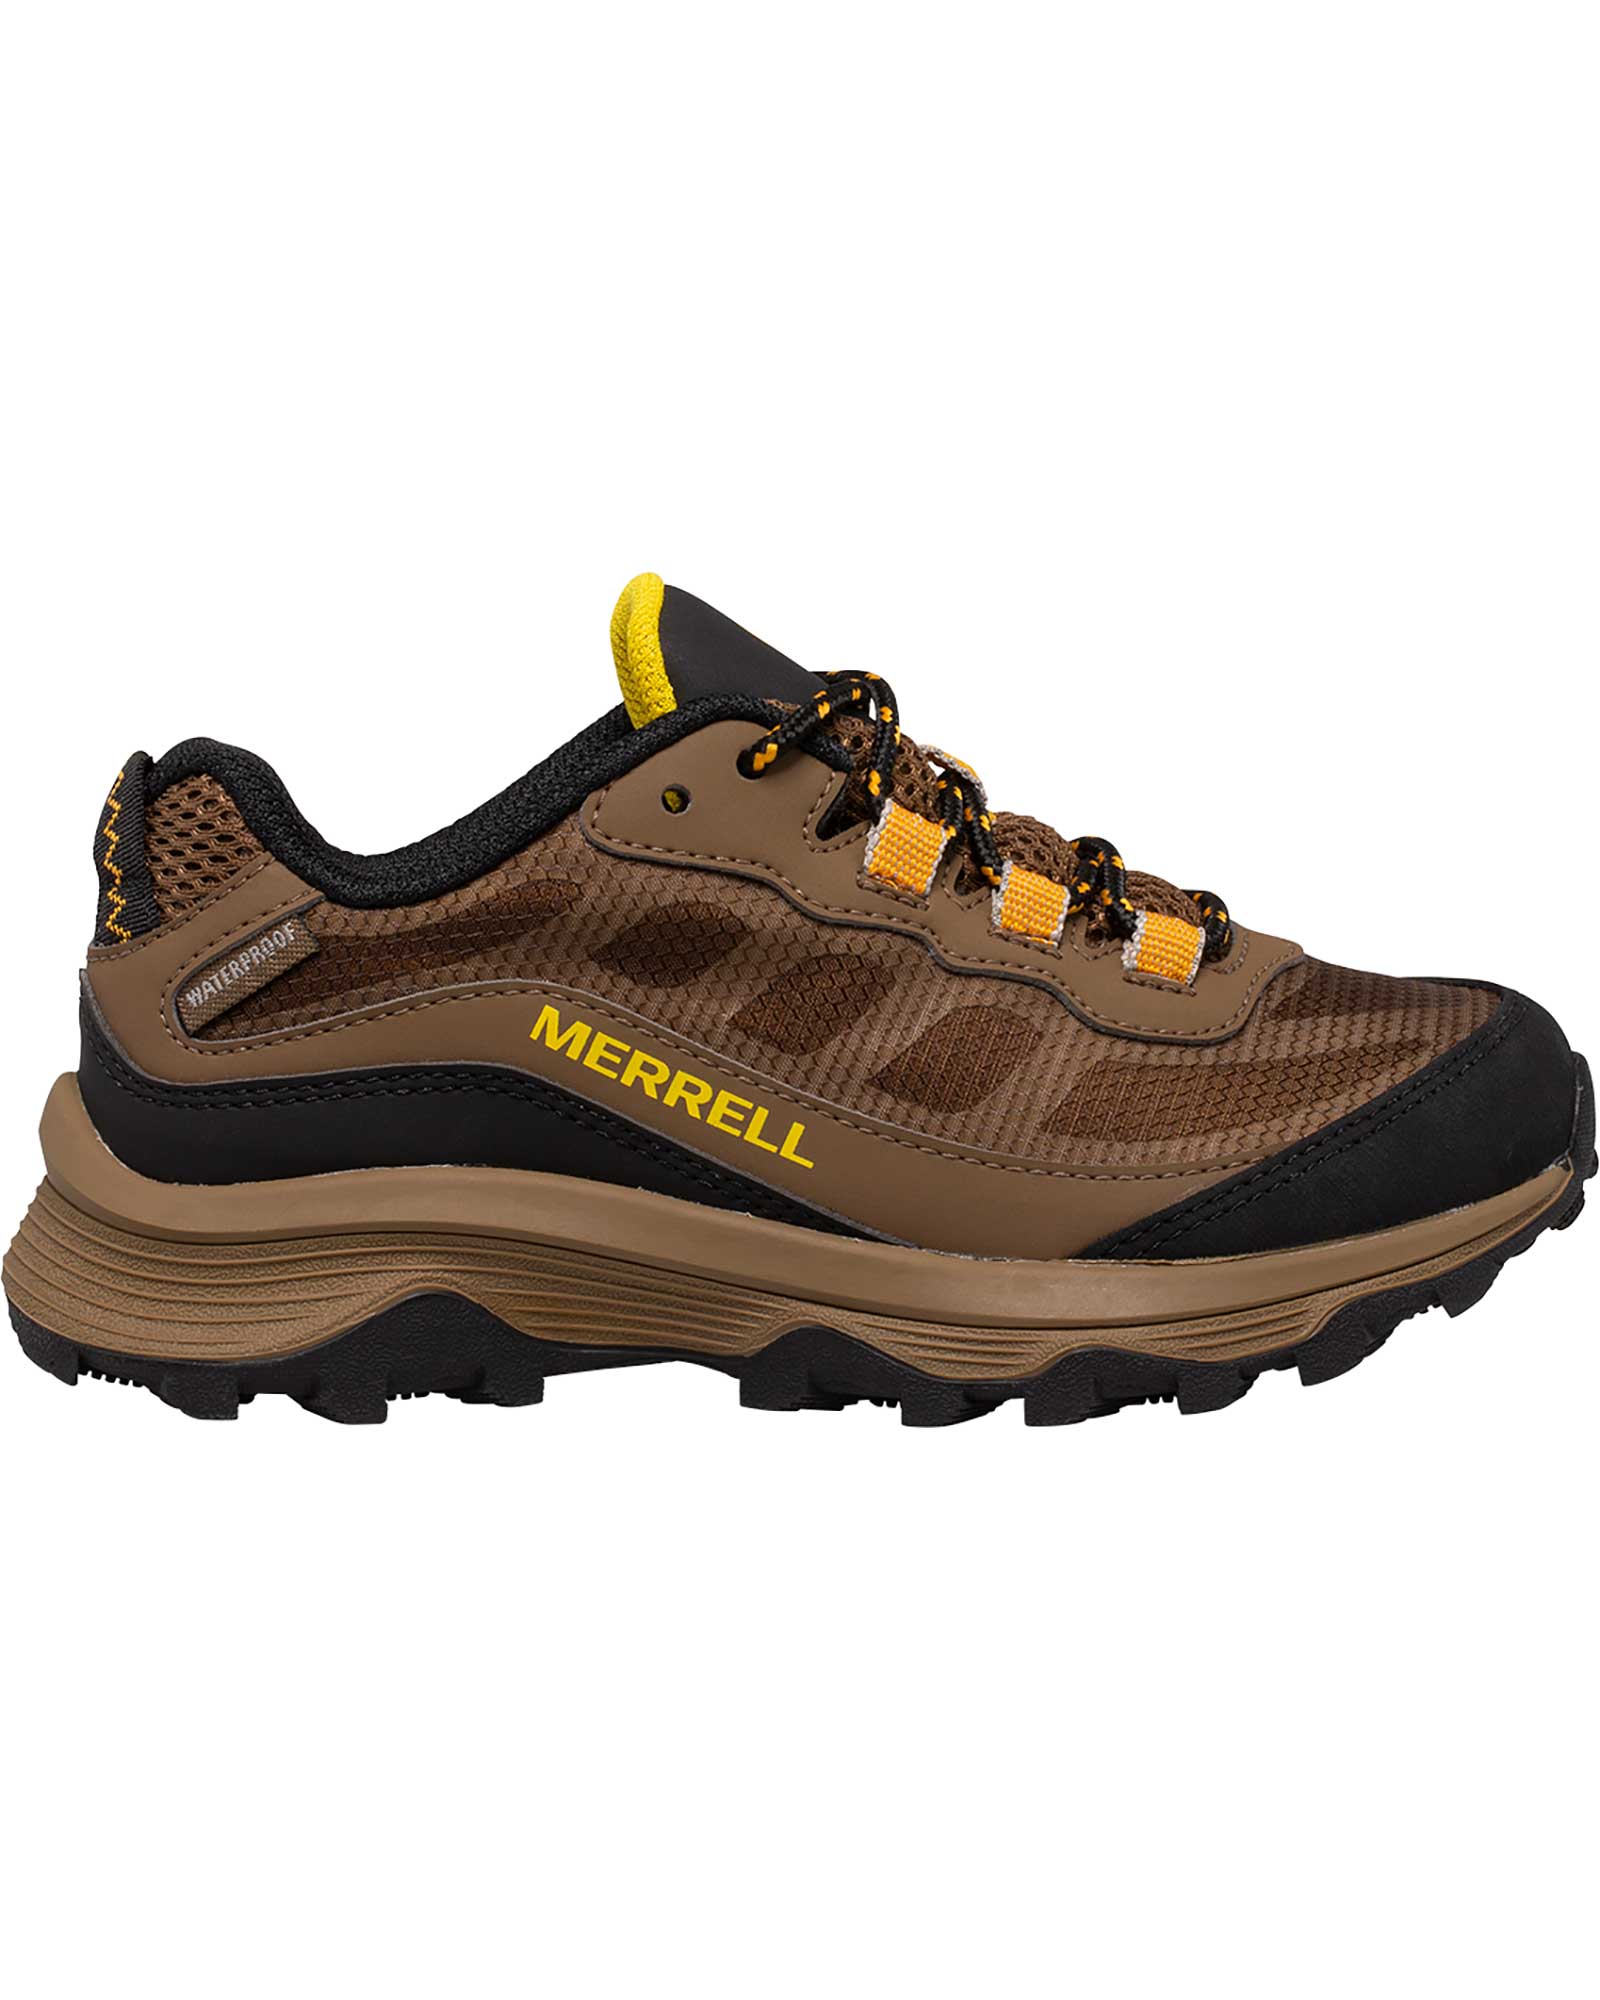 Merrell Moab Speed Laces Kids Waterproof Shoes